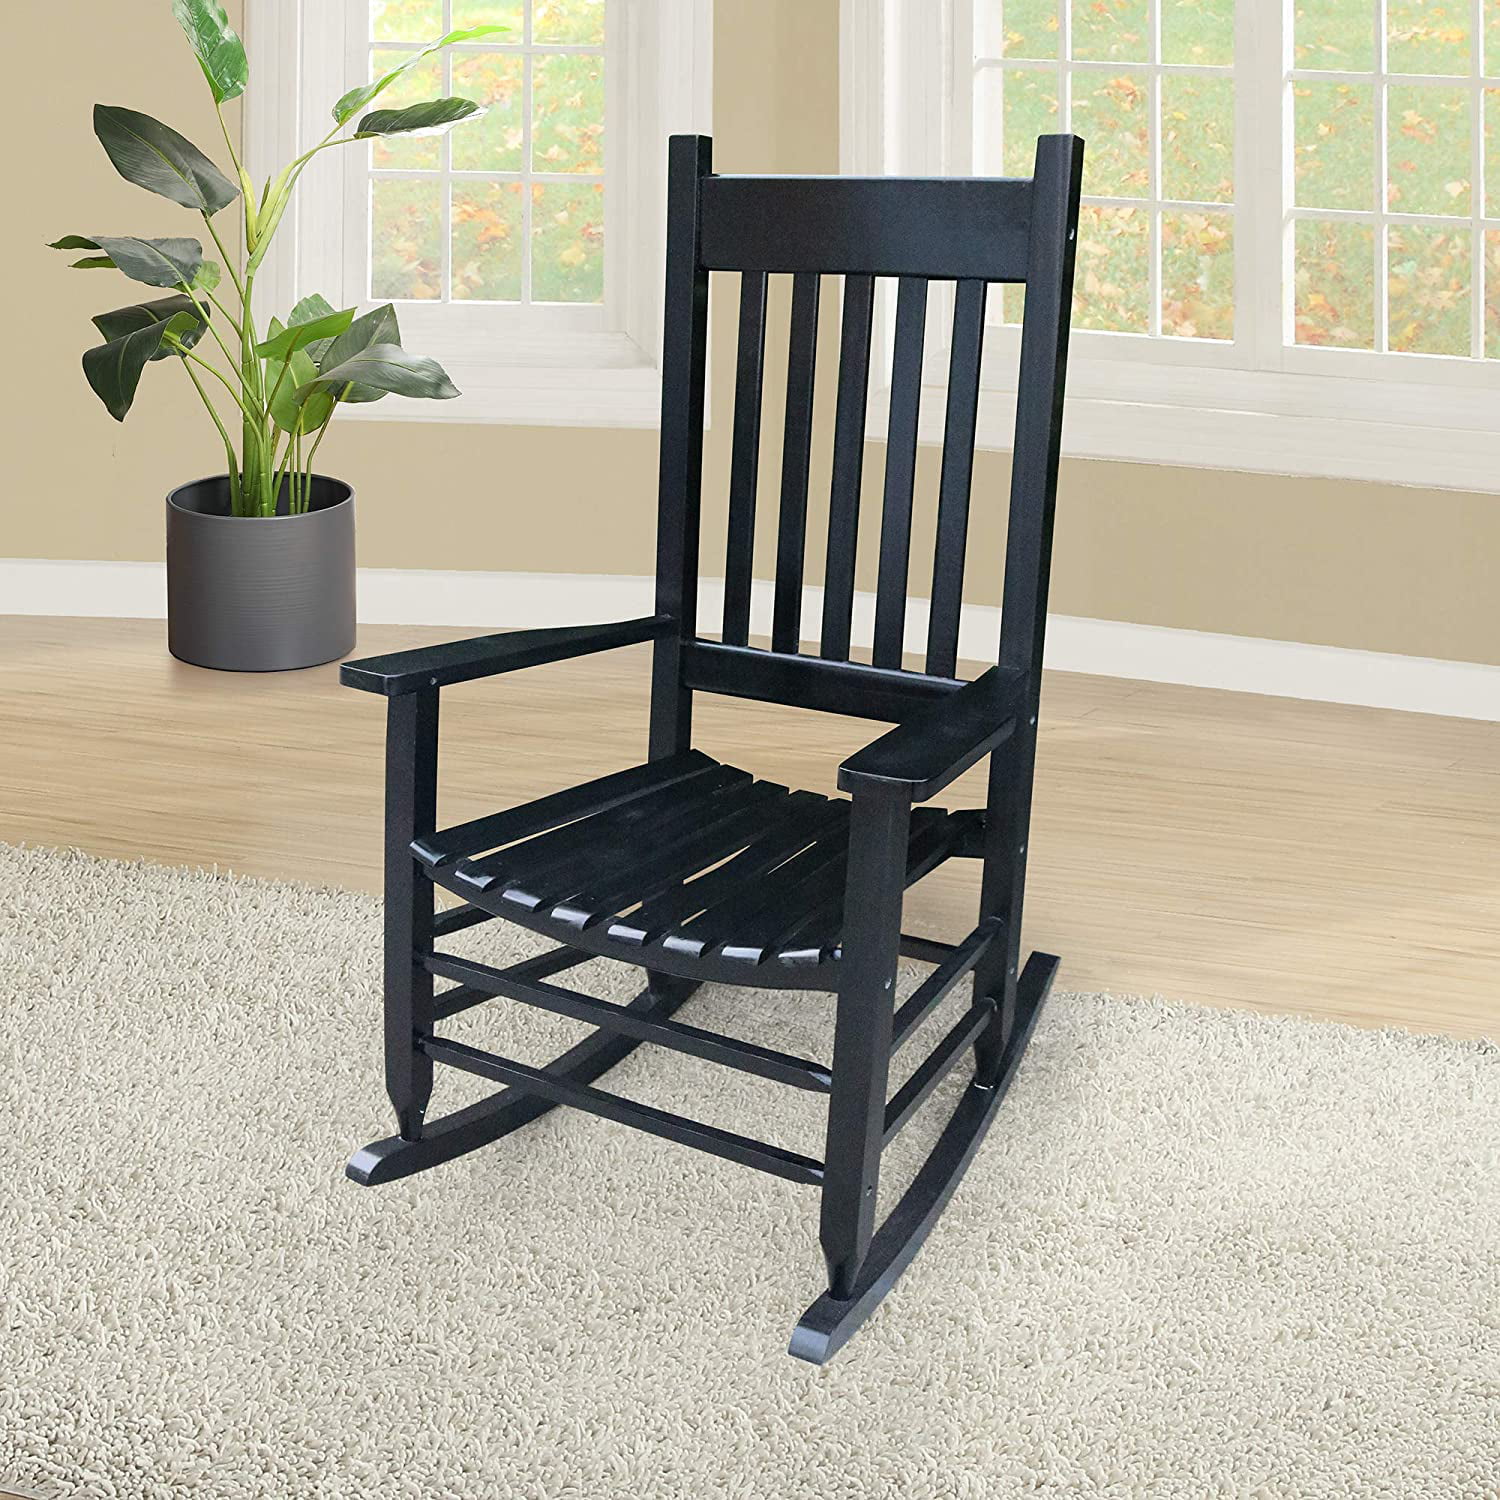 Wood Rocking Chair for Adults, HeavyDuty 300 lb Capacity